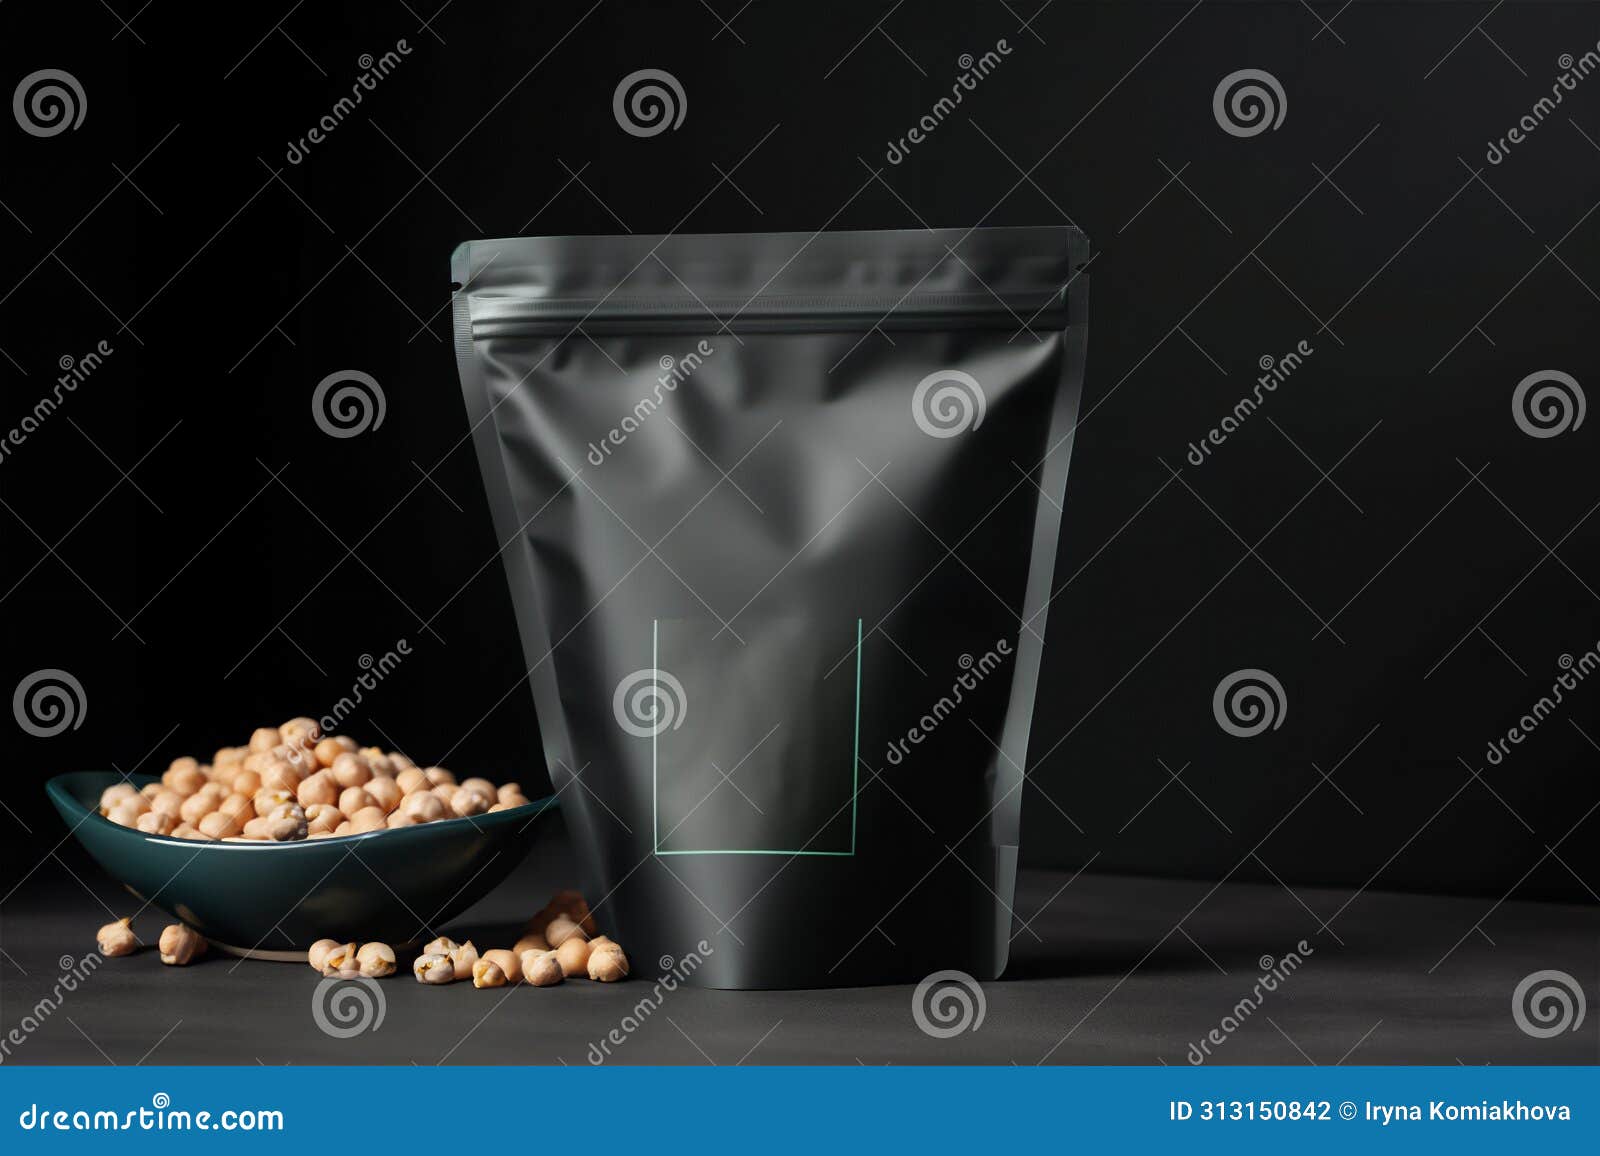 mylar bags with oxygen absorbers for bulk products chickpea flour black on black background mockup